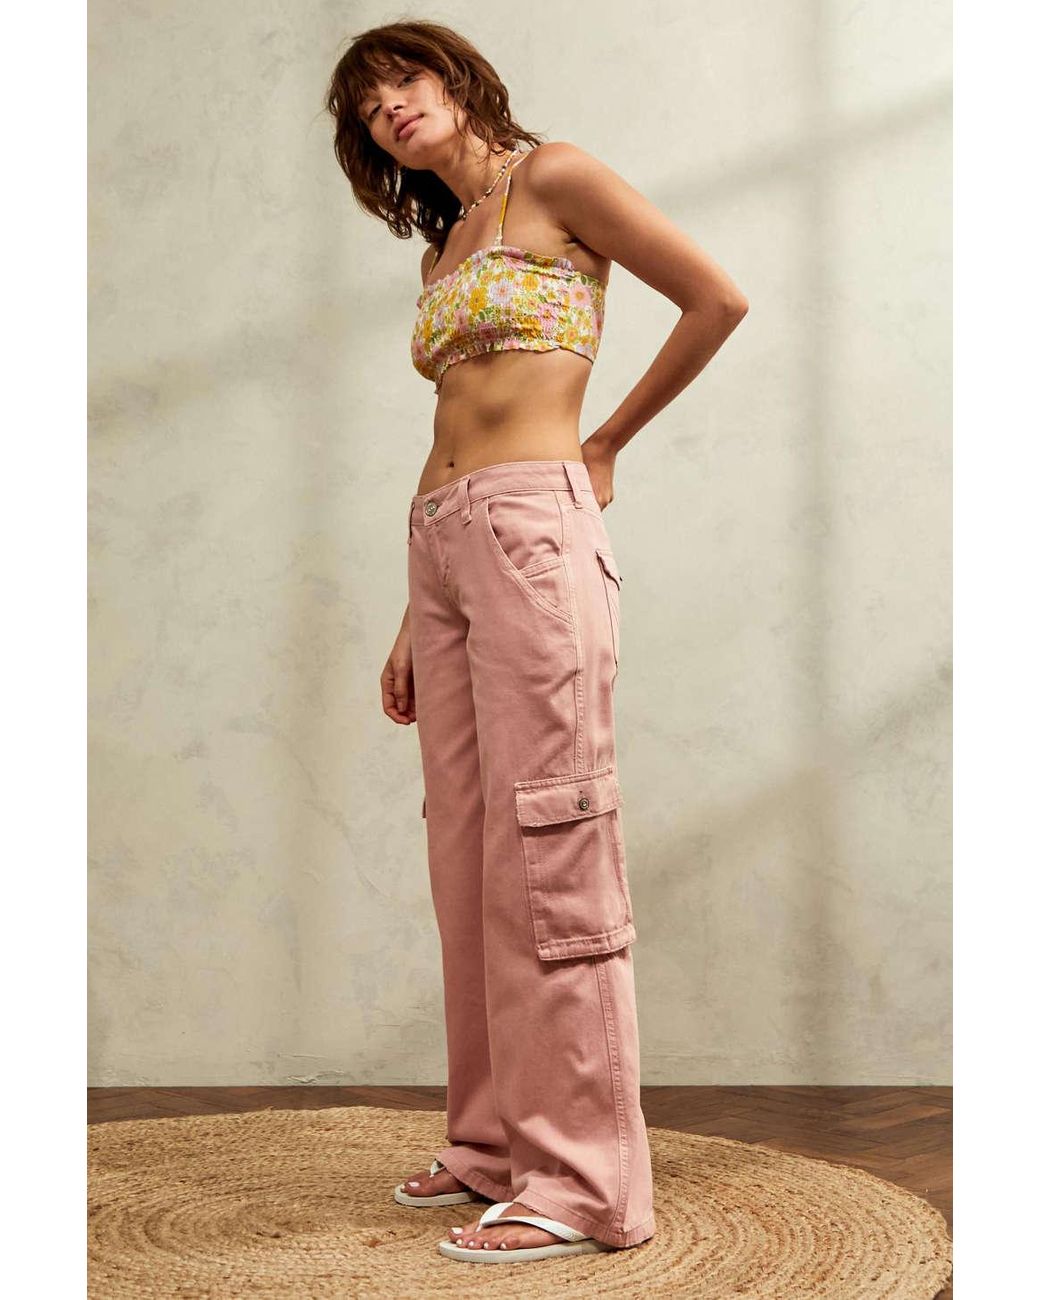 Reveey Pants - Low Rise Cargo Pants in Light Pink